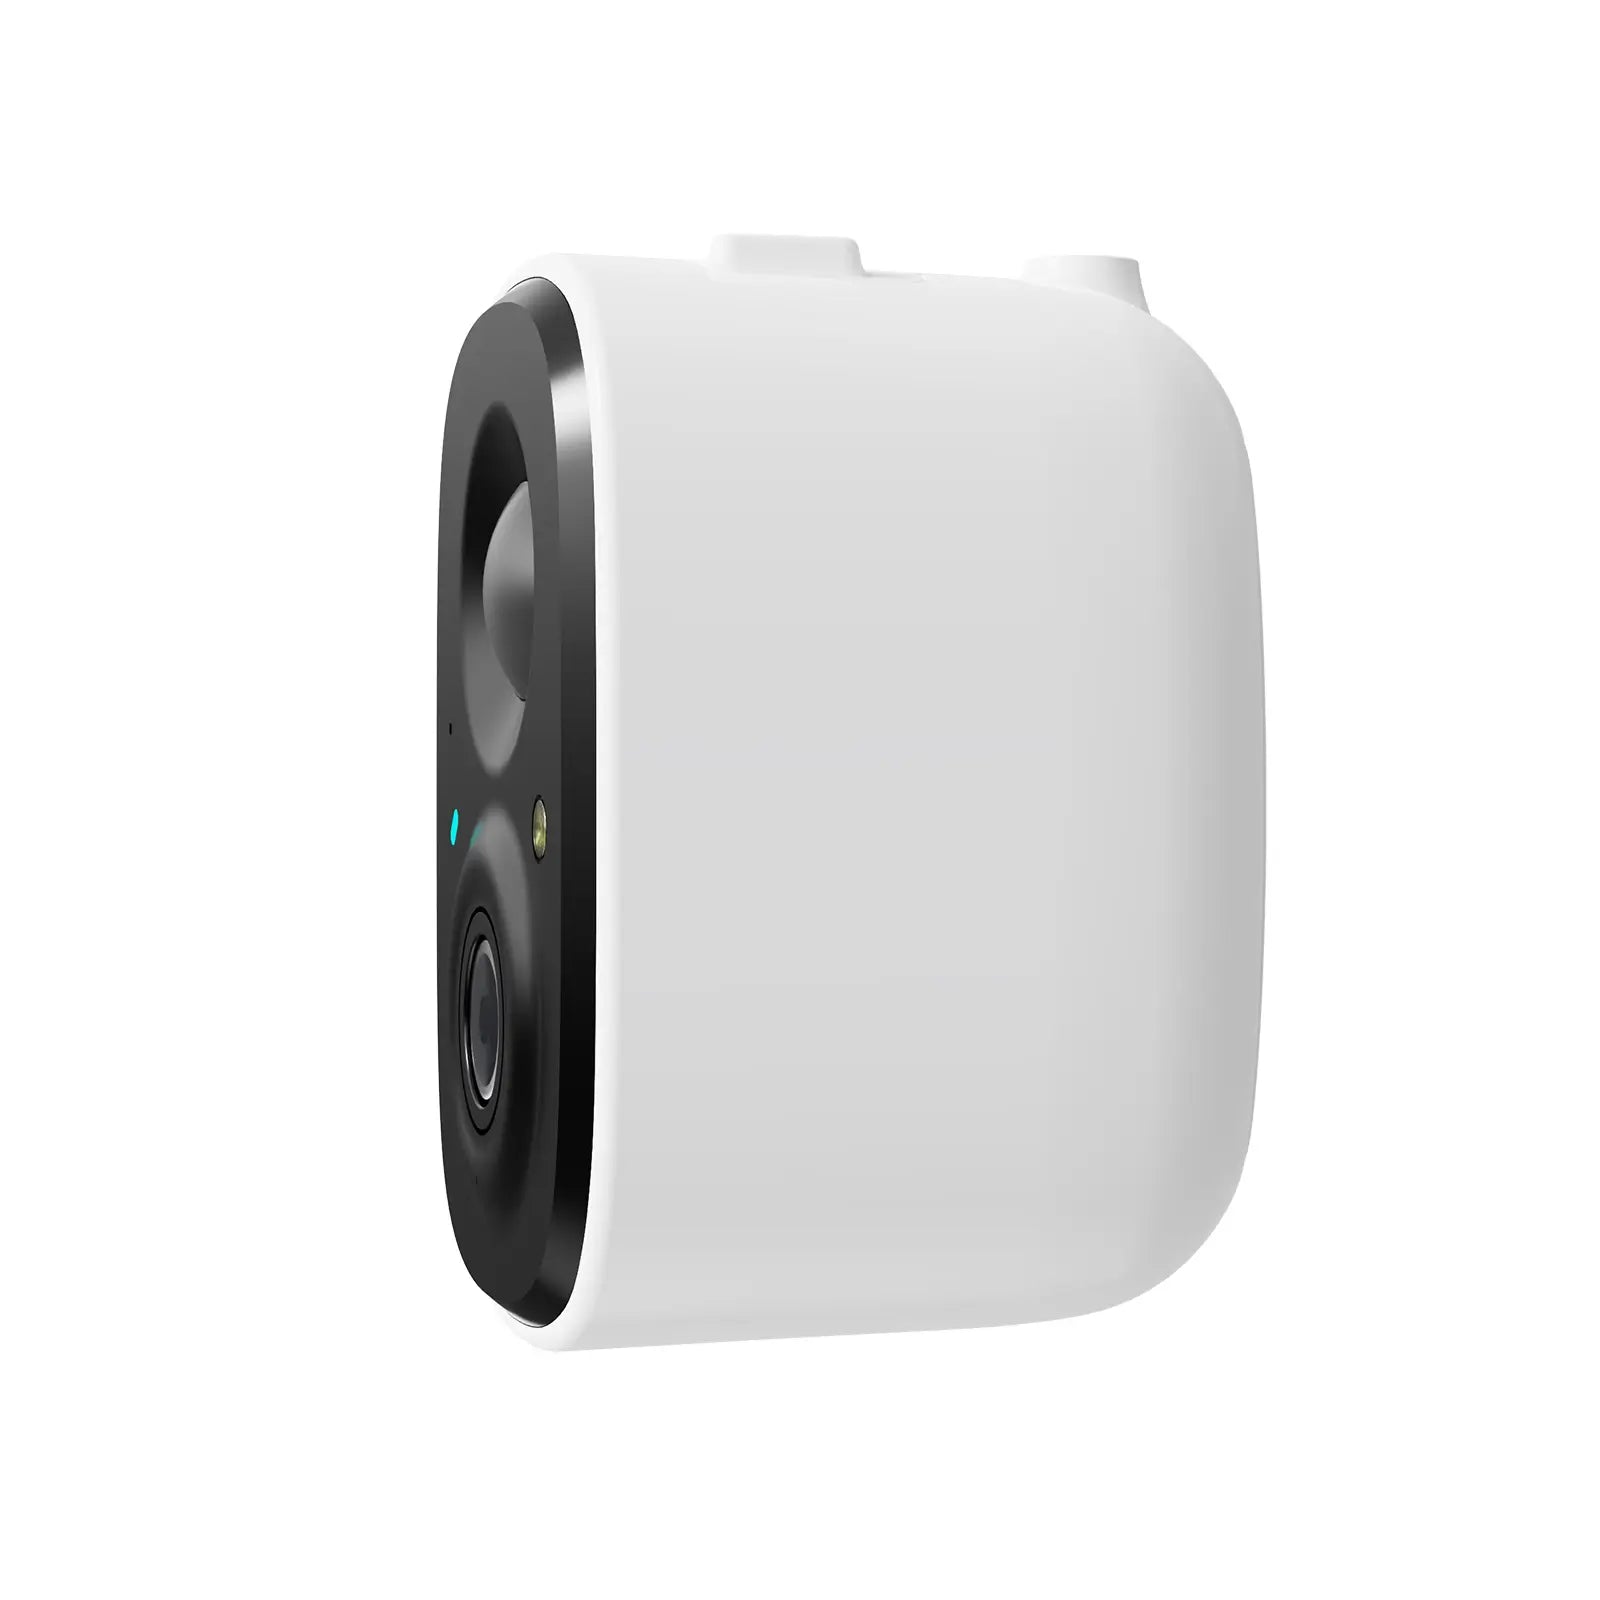 BirdHi Camera, HummerHi Camera, stream black and white color matching, round and streamlined appearance